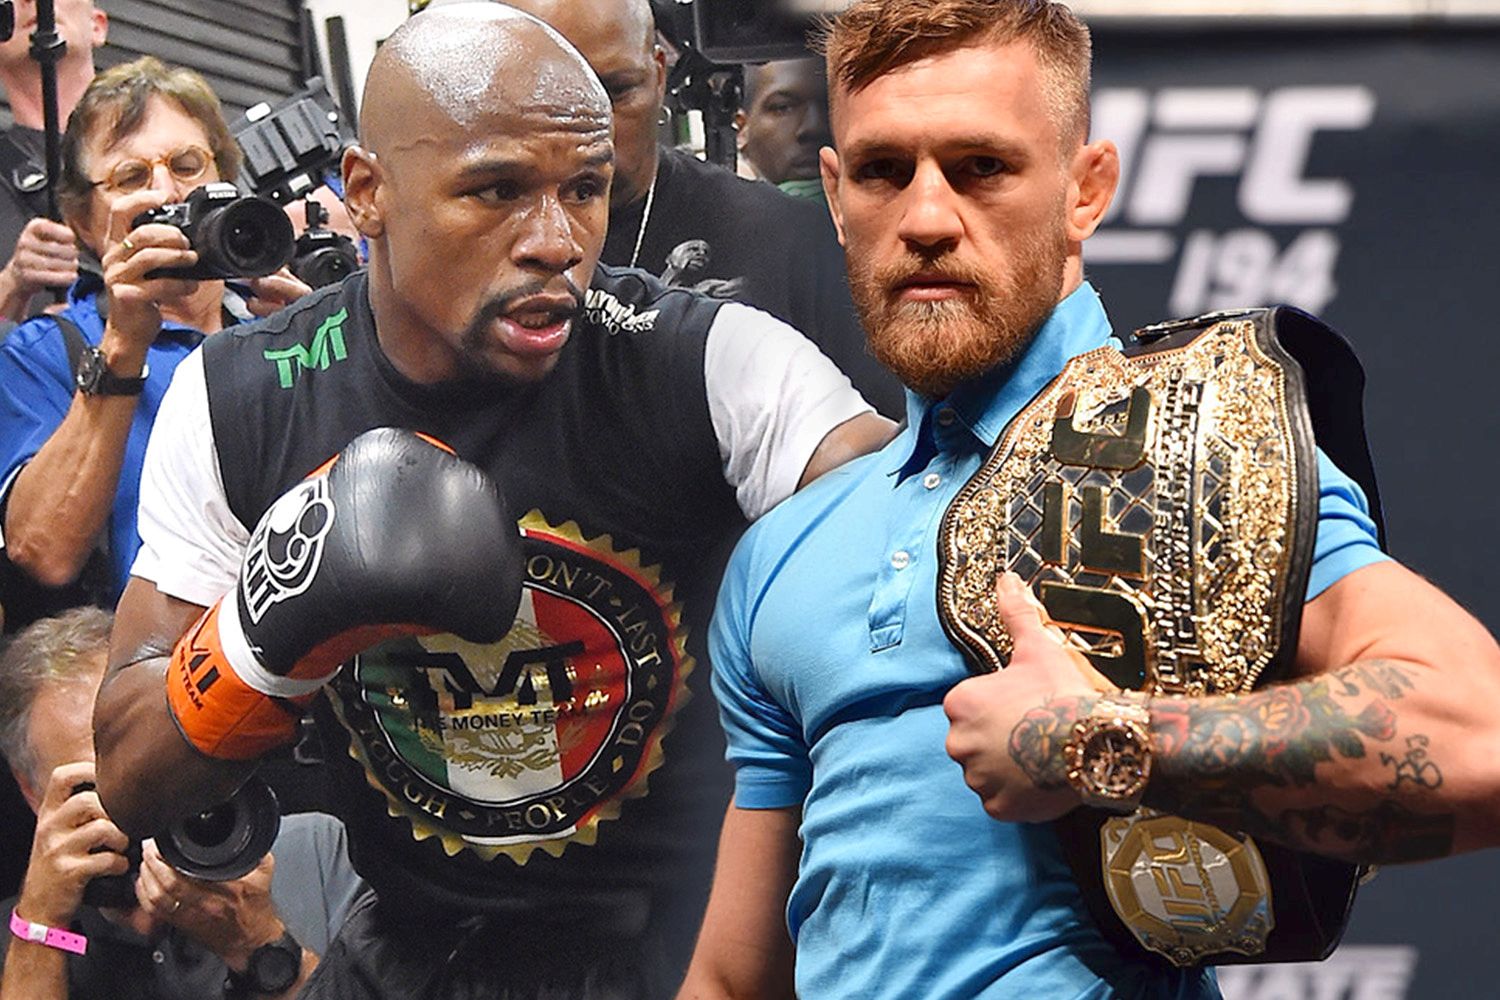 McGregor Offended by Floyd: ‘My People Have Always Been Oppressed’